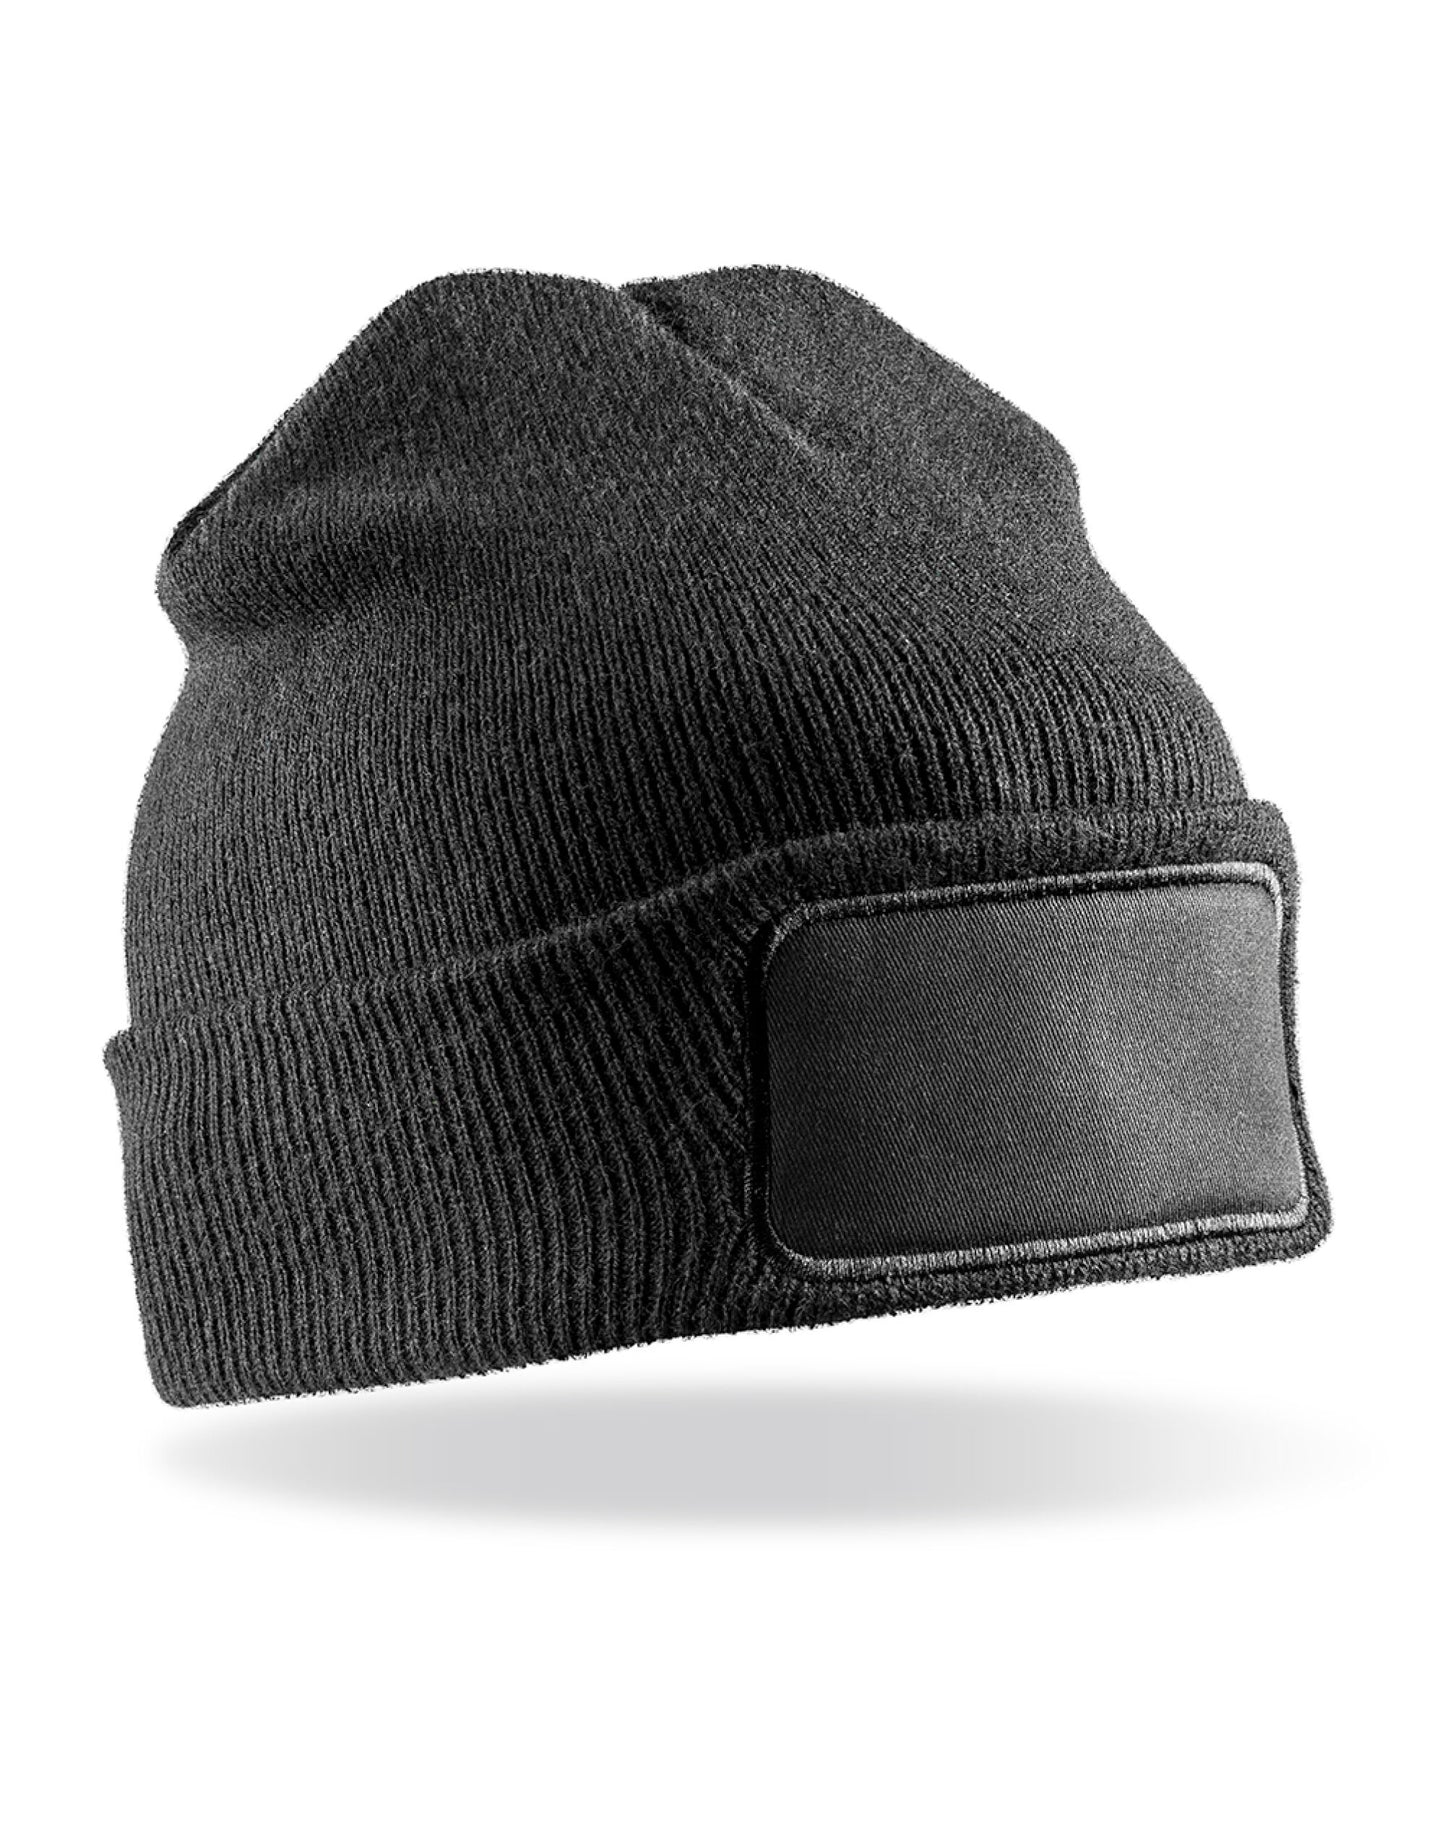 Result Winter Double Knit Printer Beanie